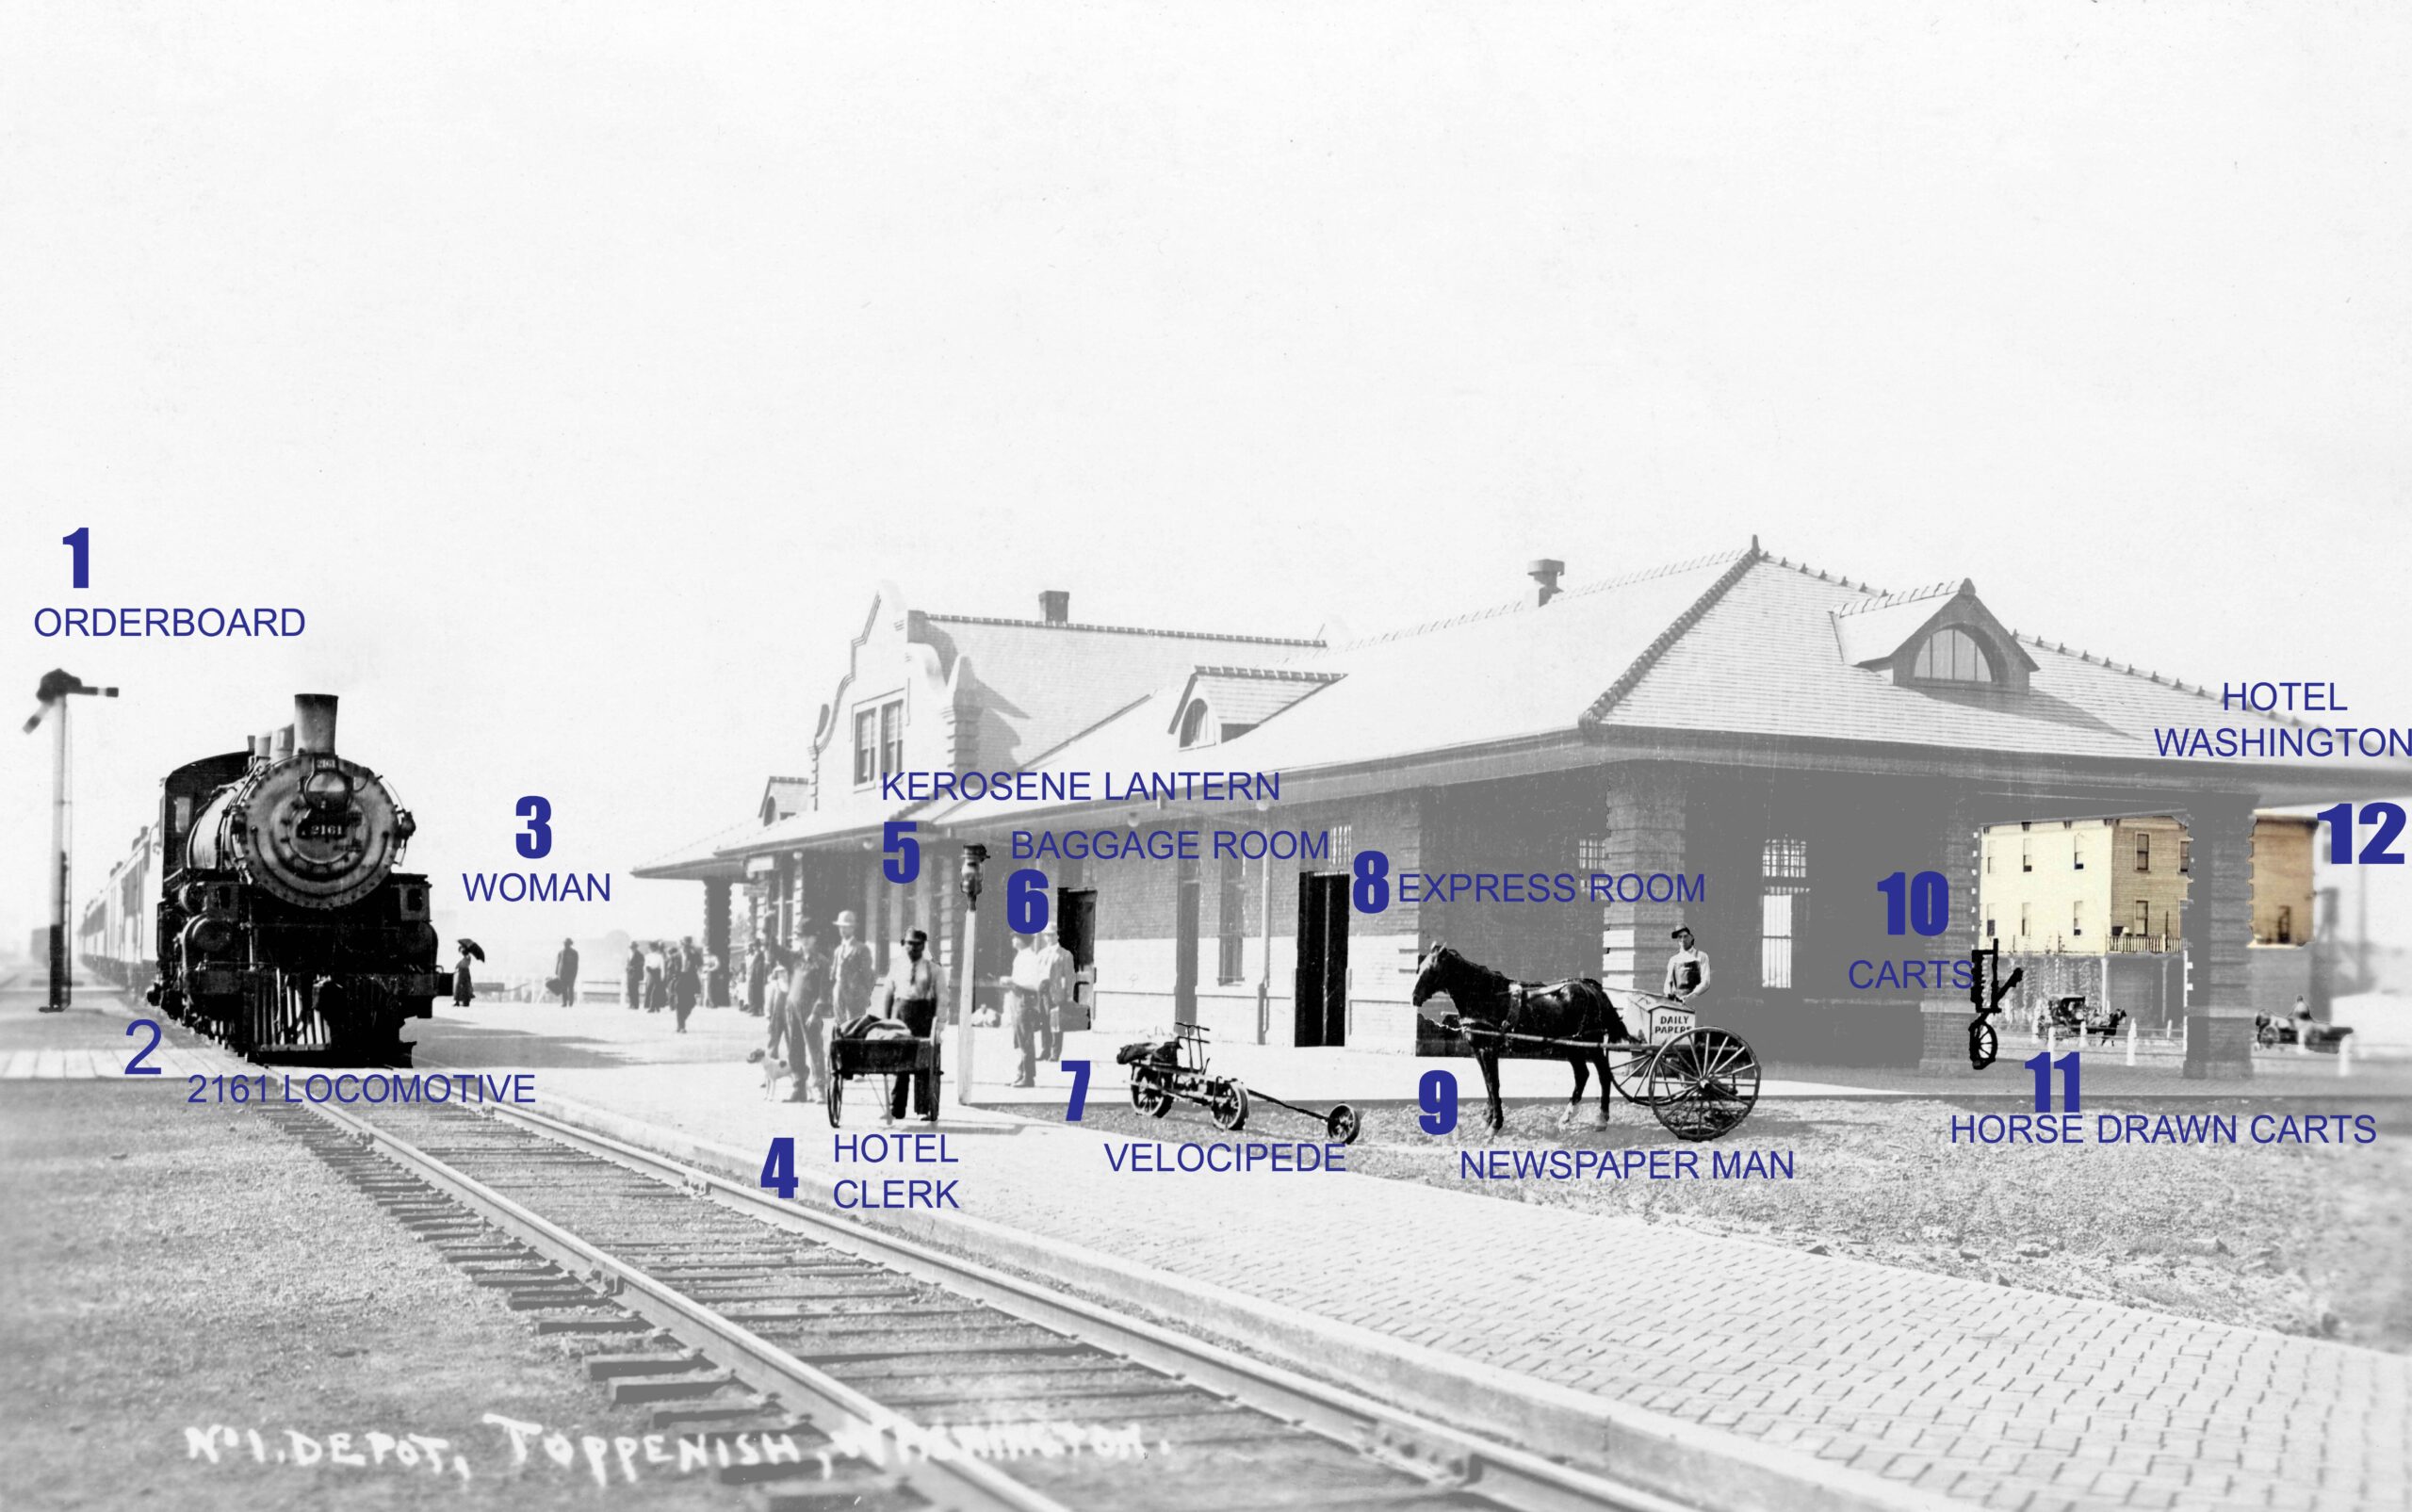 Toppenish Depot 1912 with numbered descriptors overlaid into photograph